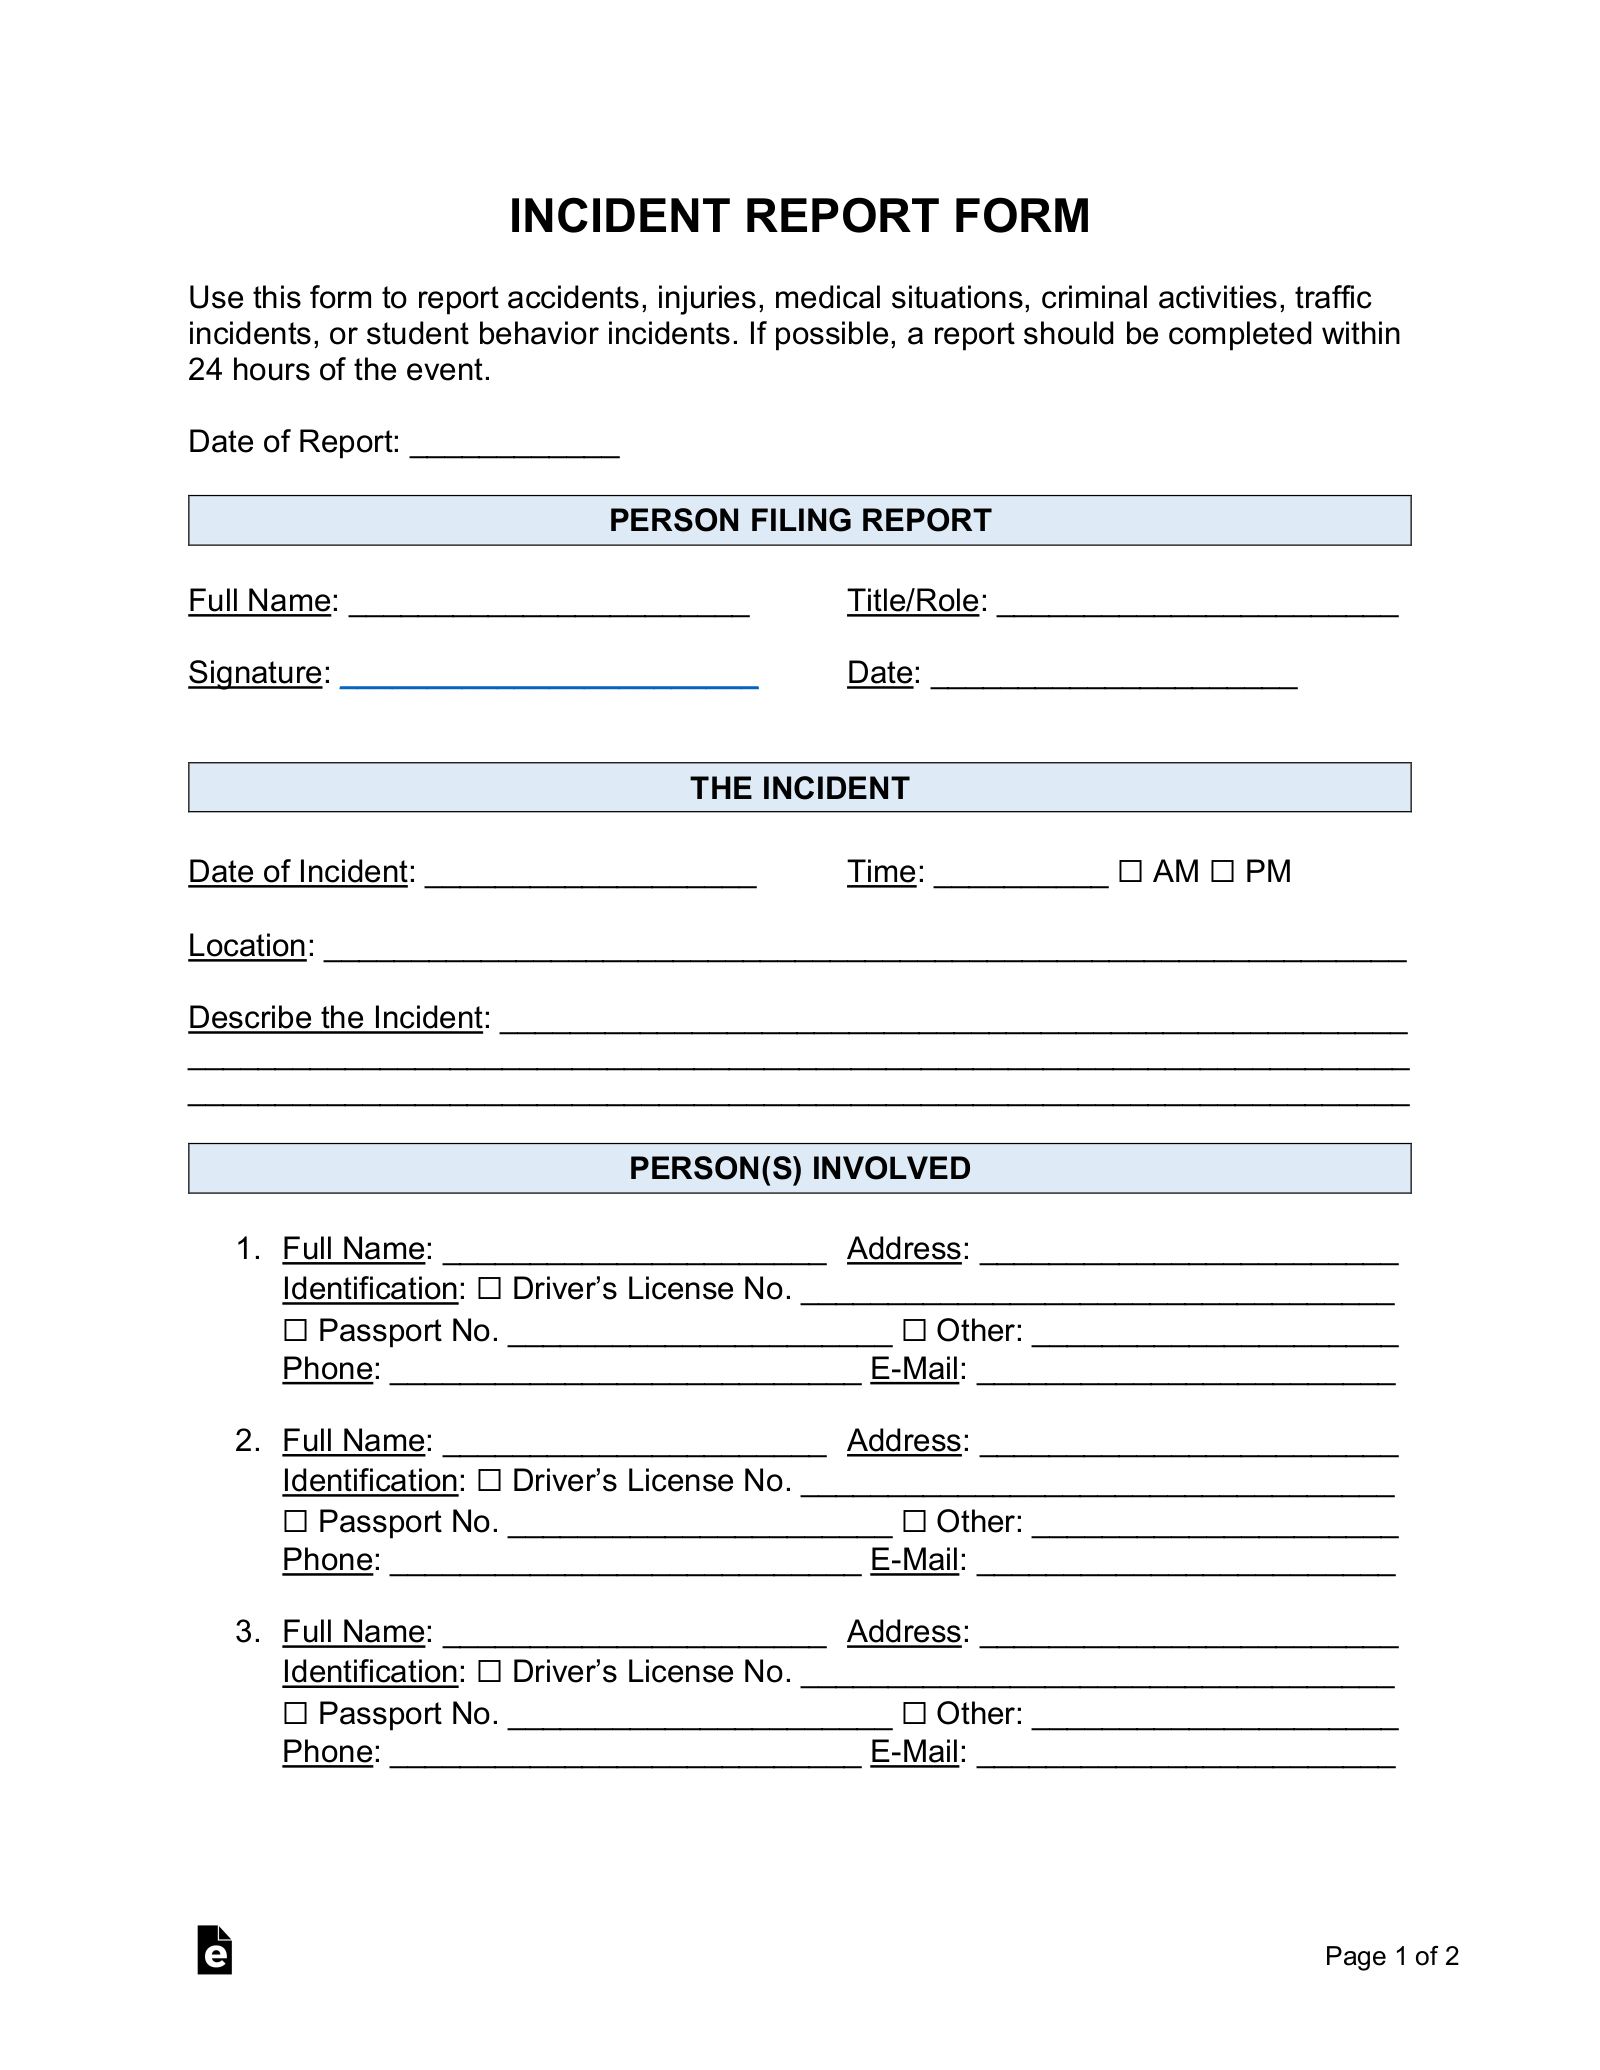 Free Incident Report Templates Sample PDF Word EForms